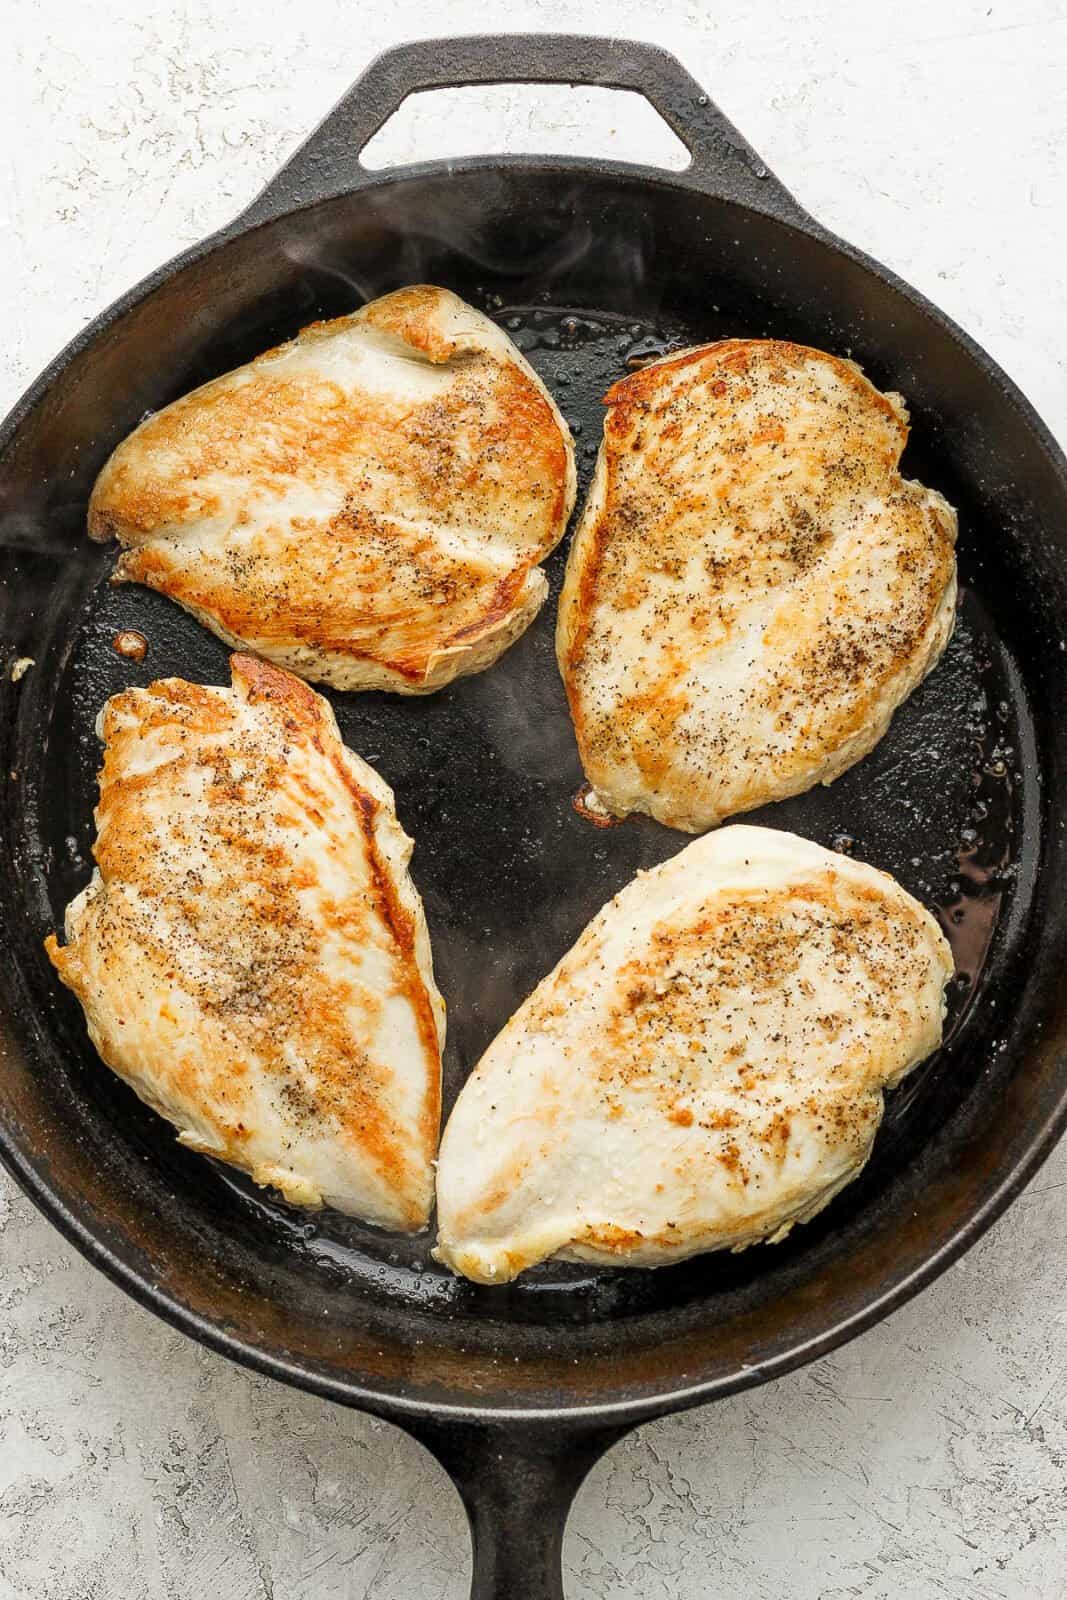 Cast iron skillet with 4 chicken breasts inside.